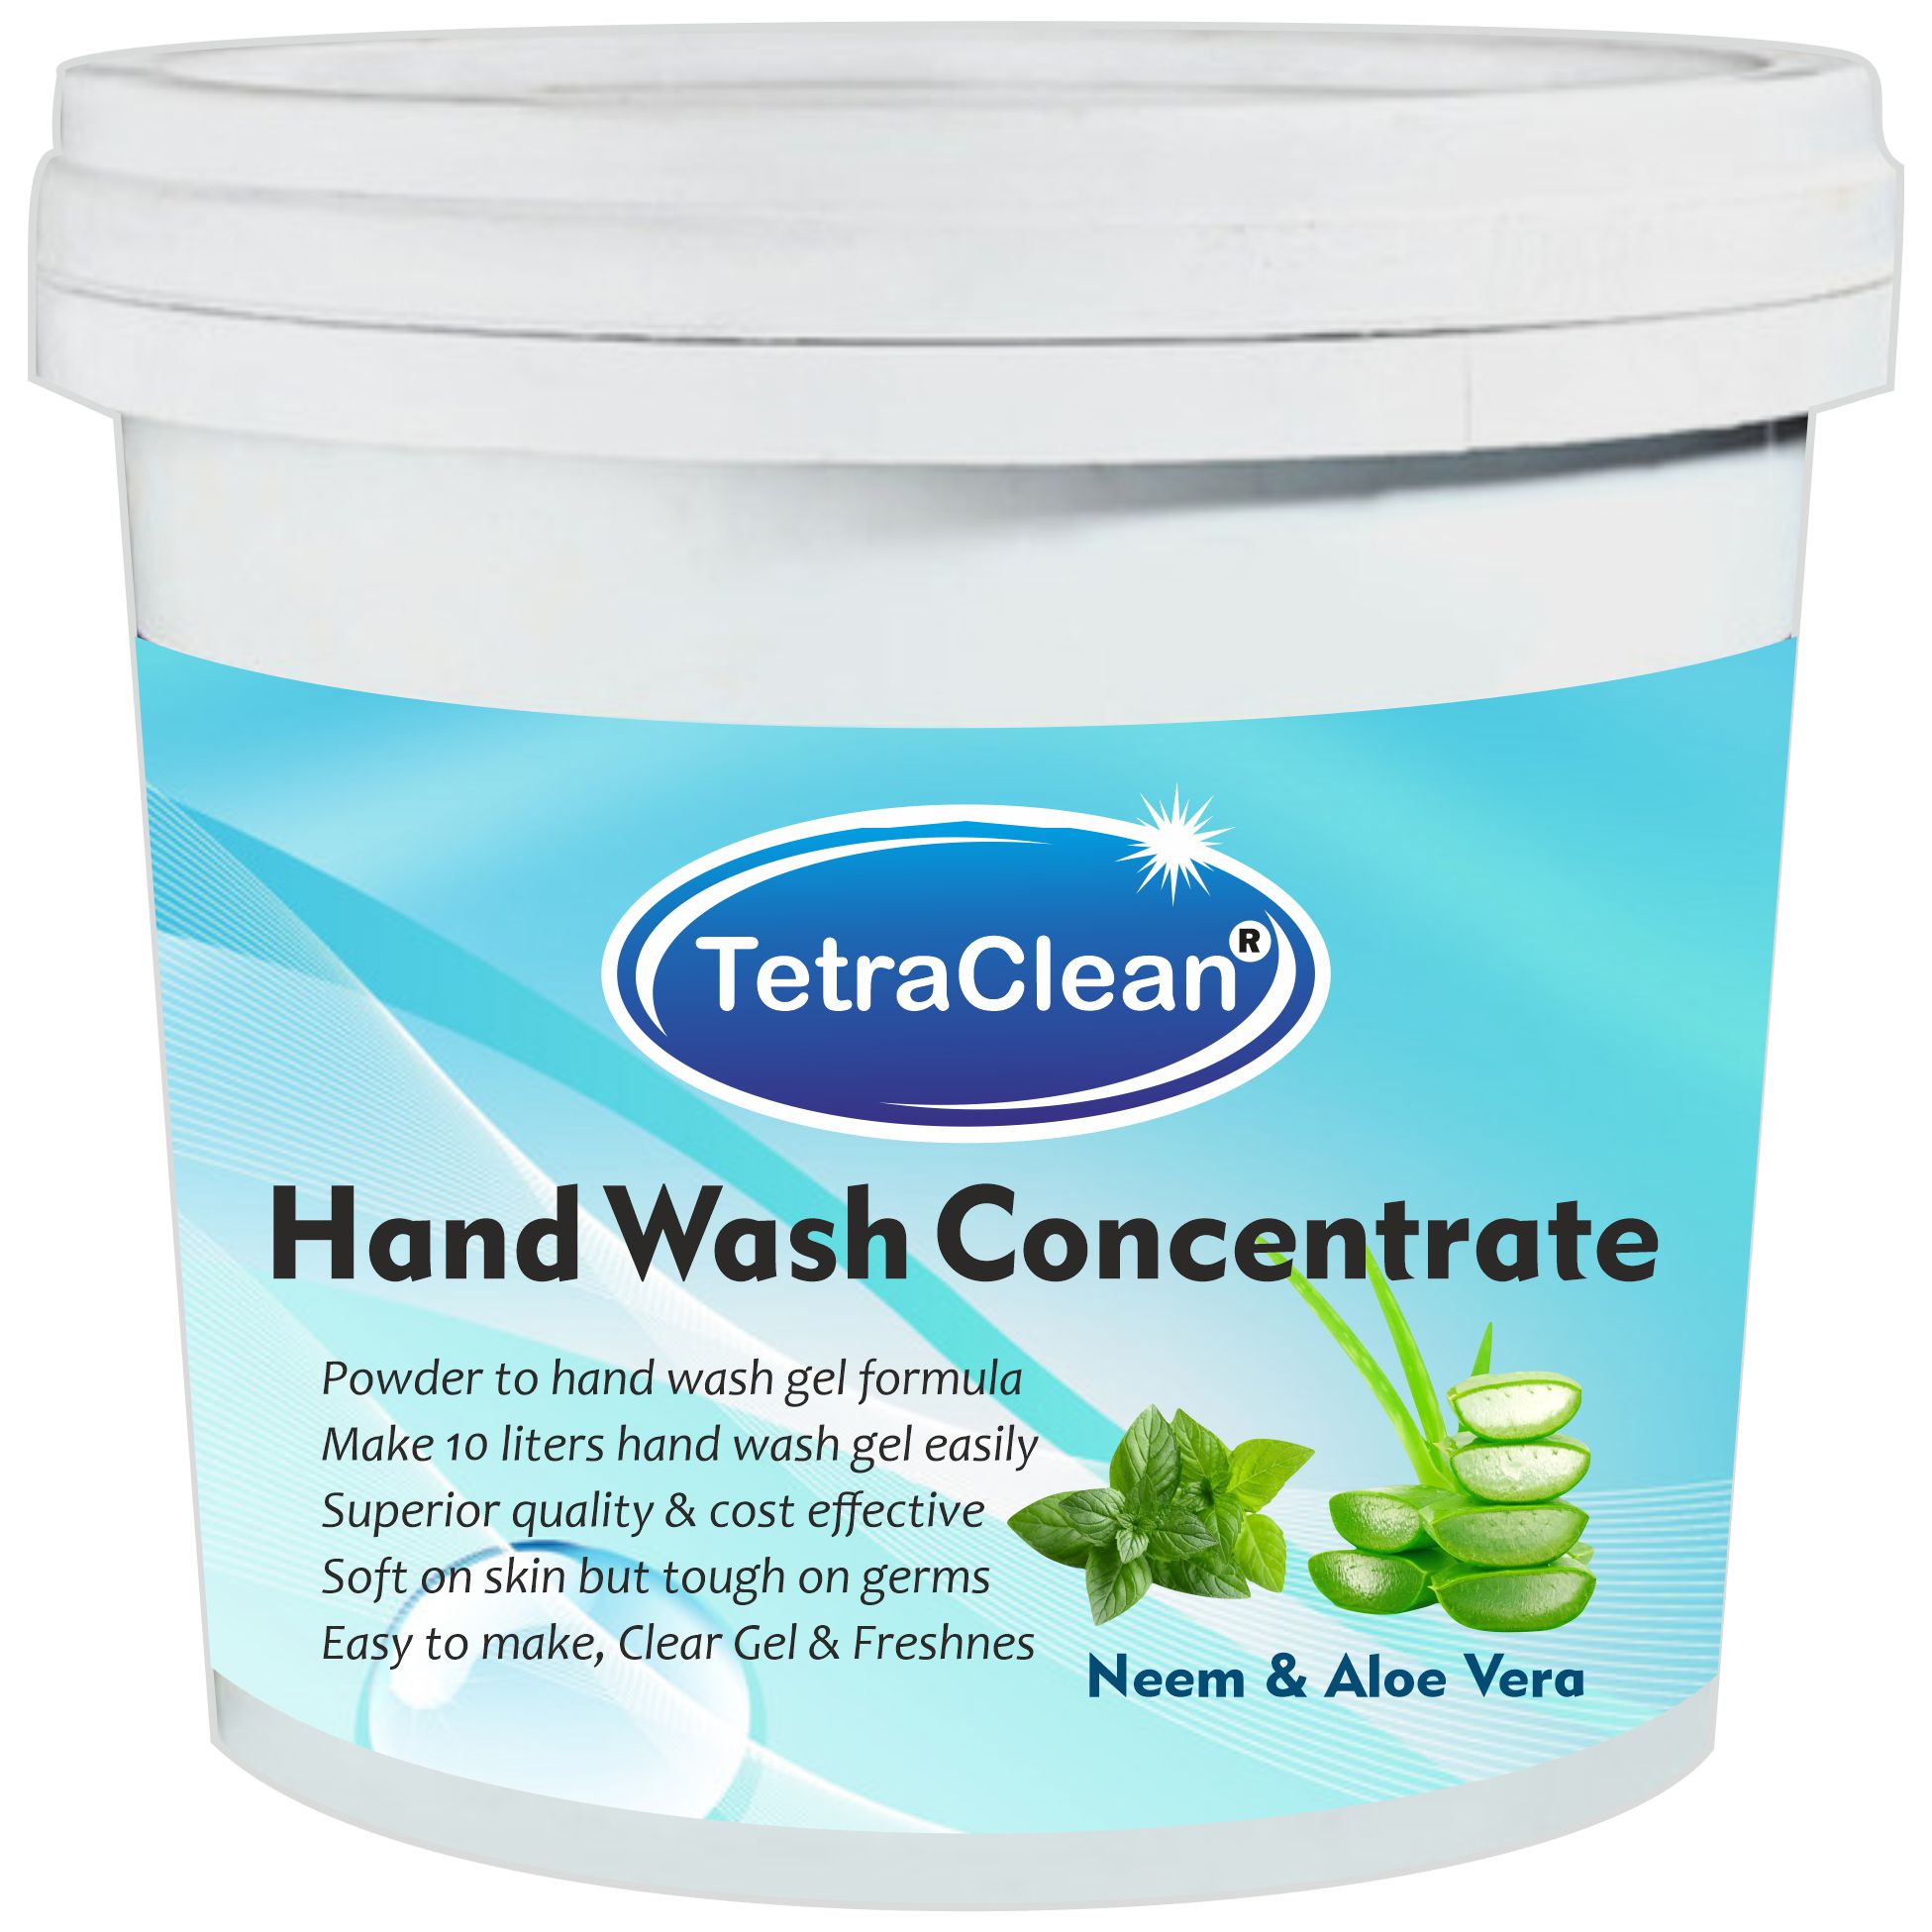 TetraClean Hand Wash Concentrate Powder - 500gm packing - with Neem and aloe vera fragrance